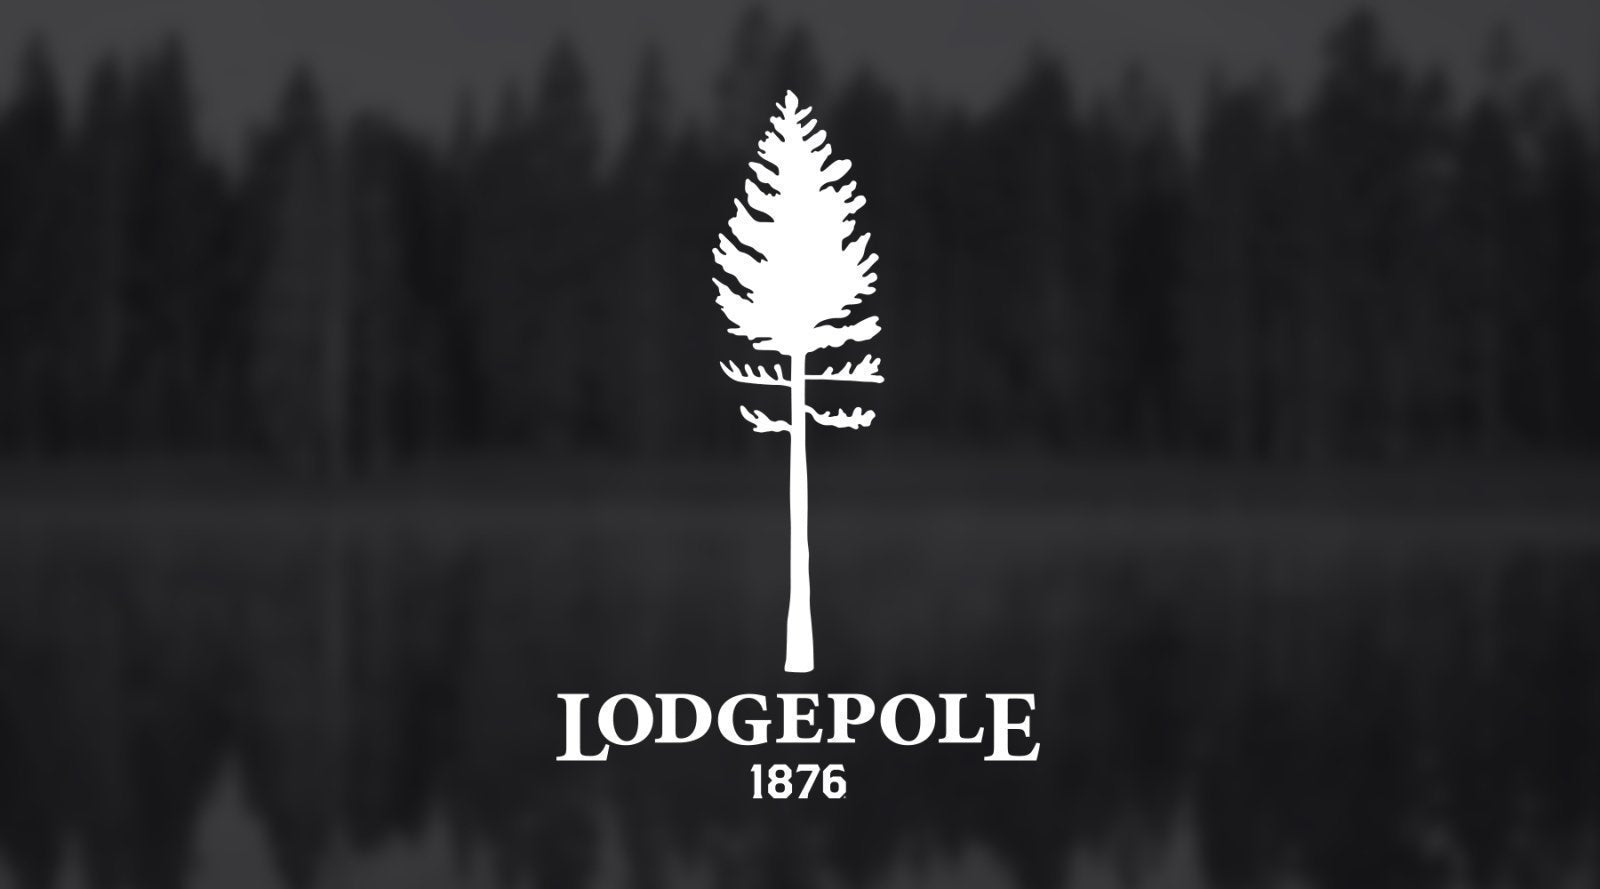 1876 | Lodgepole | 1876 | The State of Exploration